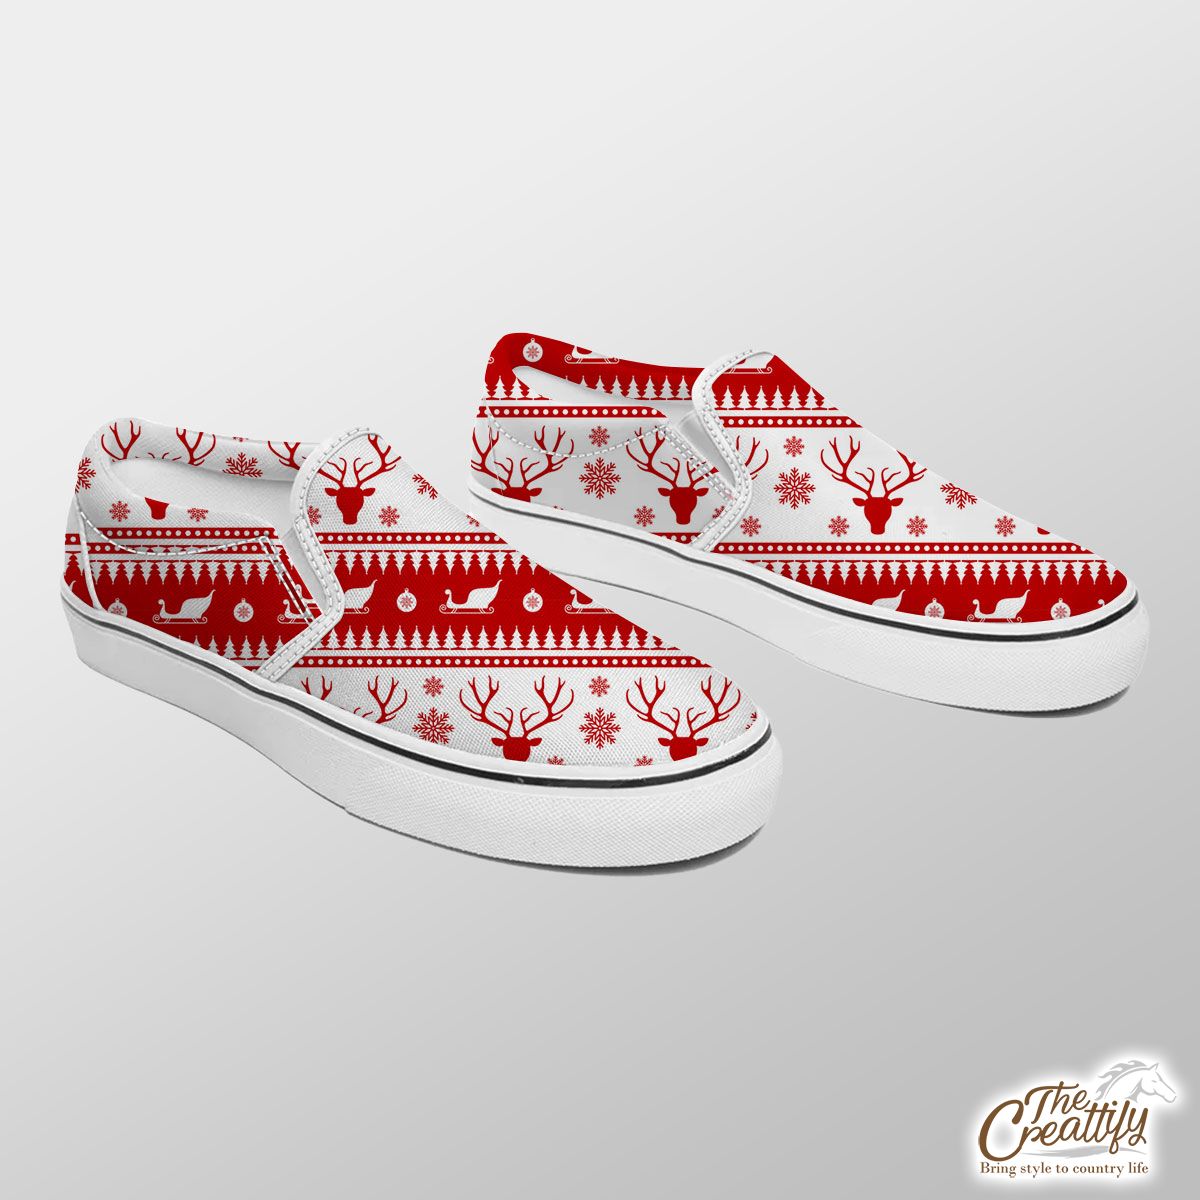 Red And White Reindeer, Santa Sleigh, Christmas Balls On The Snowflake Background Slip On Sneakers